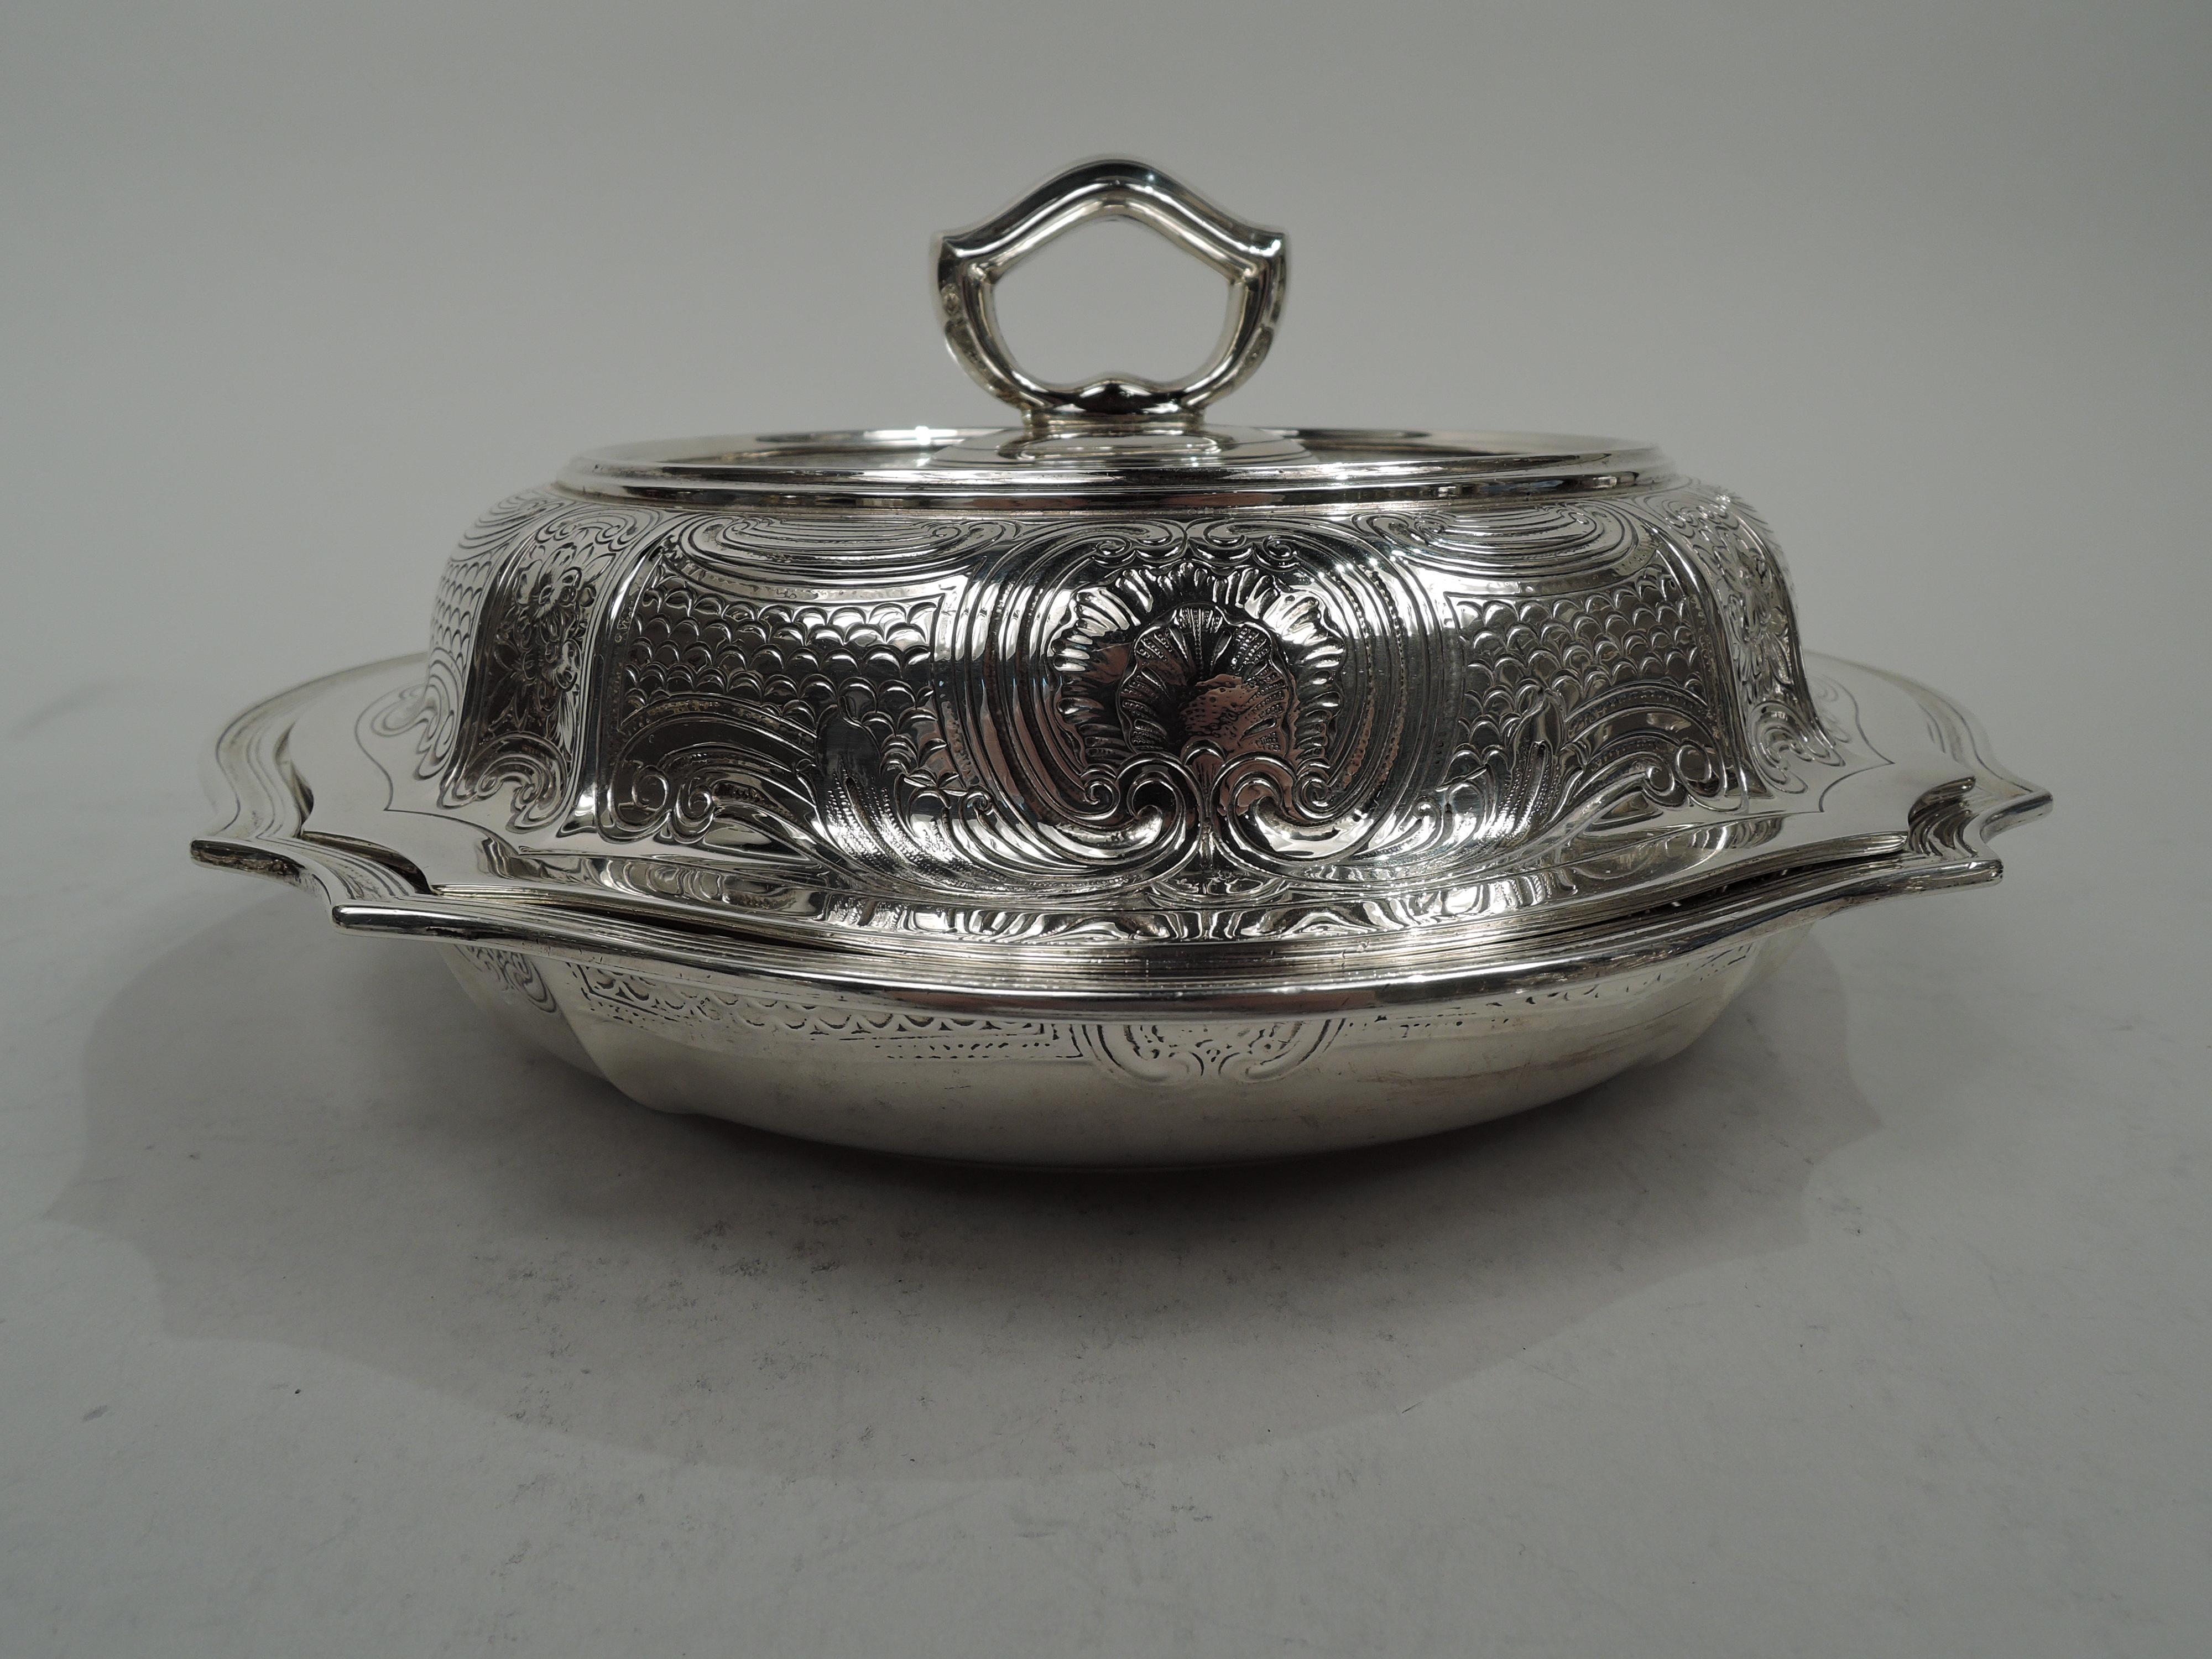 Edwardian Modern classical sterling silver serving bowl. Made by Tiffany & Co. in New York, ca 1910. Round and serpentine with tapering sides and reeded rim. Cover raised with tapering sides and plain and flat rim. Dense engraved scrolls, flowers,